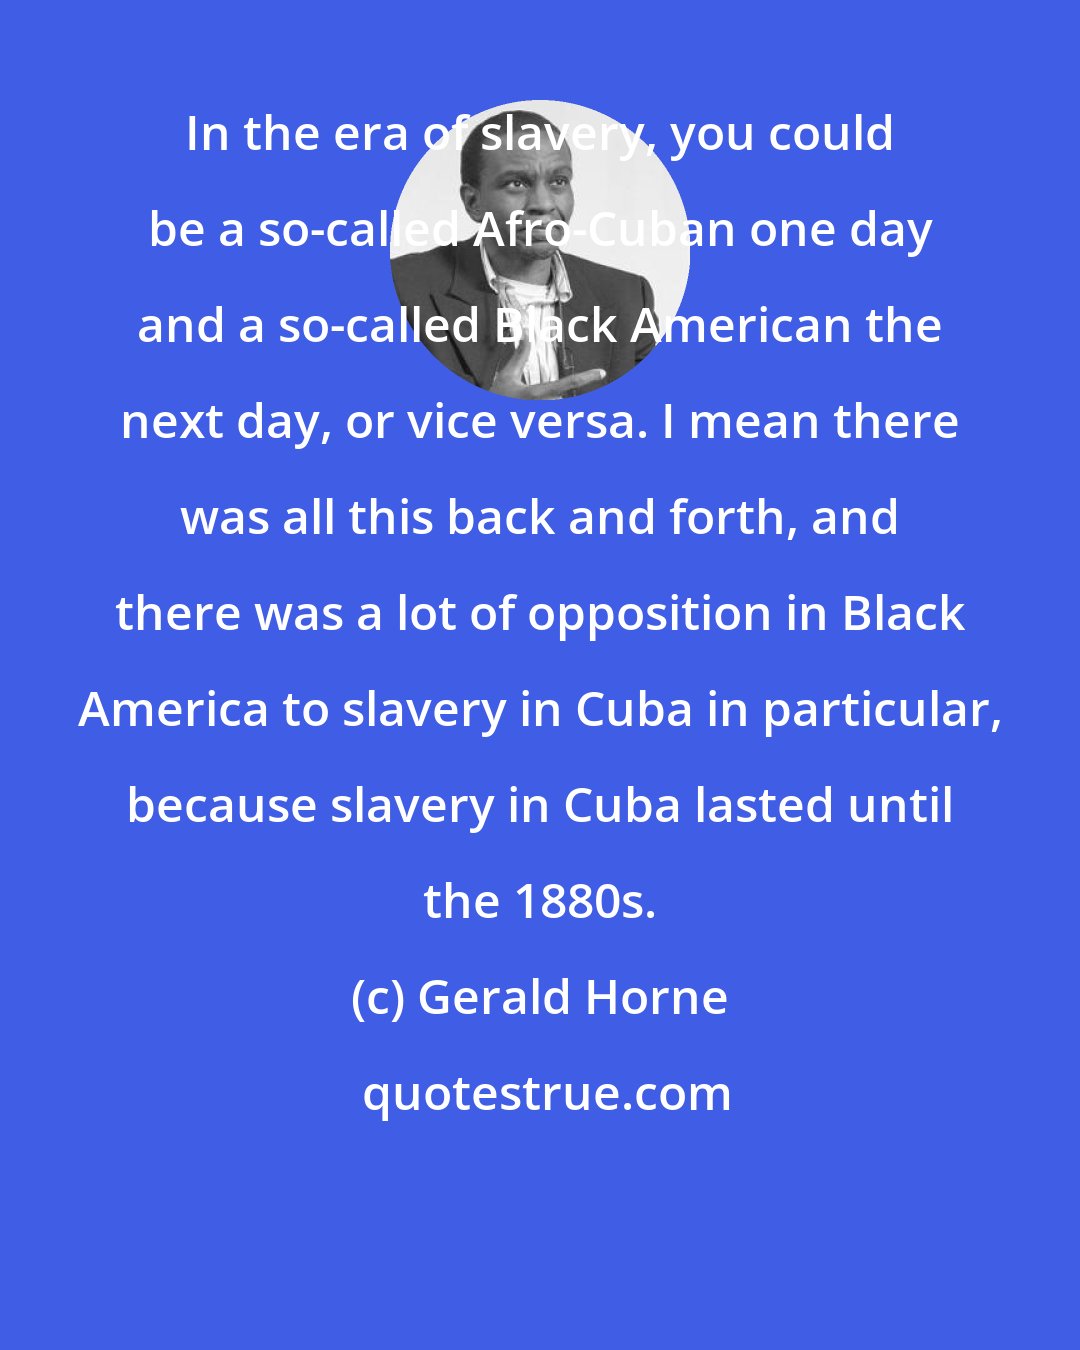 Gerald Horne: In the era of slavery, you could be a so-called Afro-Cuban one day and a so-called Black American the next day, or vice versa. I mean there was all this back and forth, and there was a lot of opposition in Black America to slavery in Cuba in particular, because slavery in Cuba lasted until the 1880s.